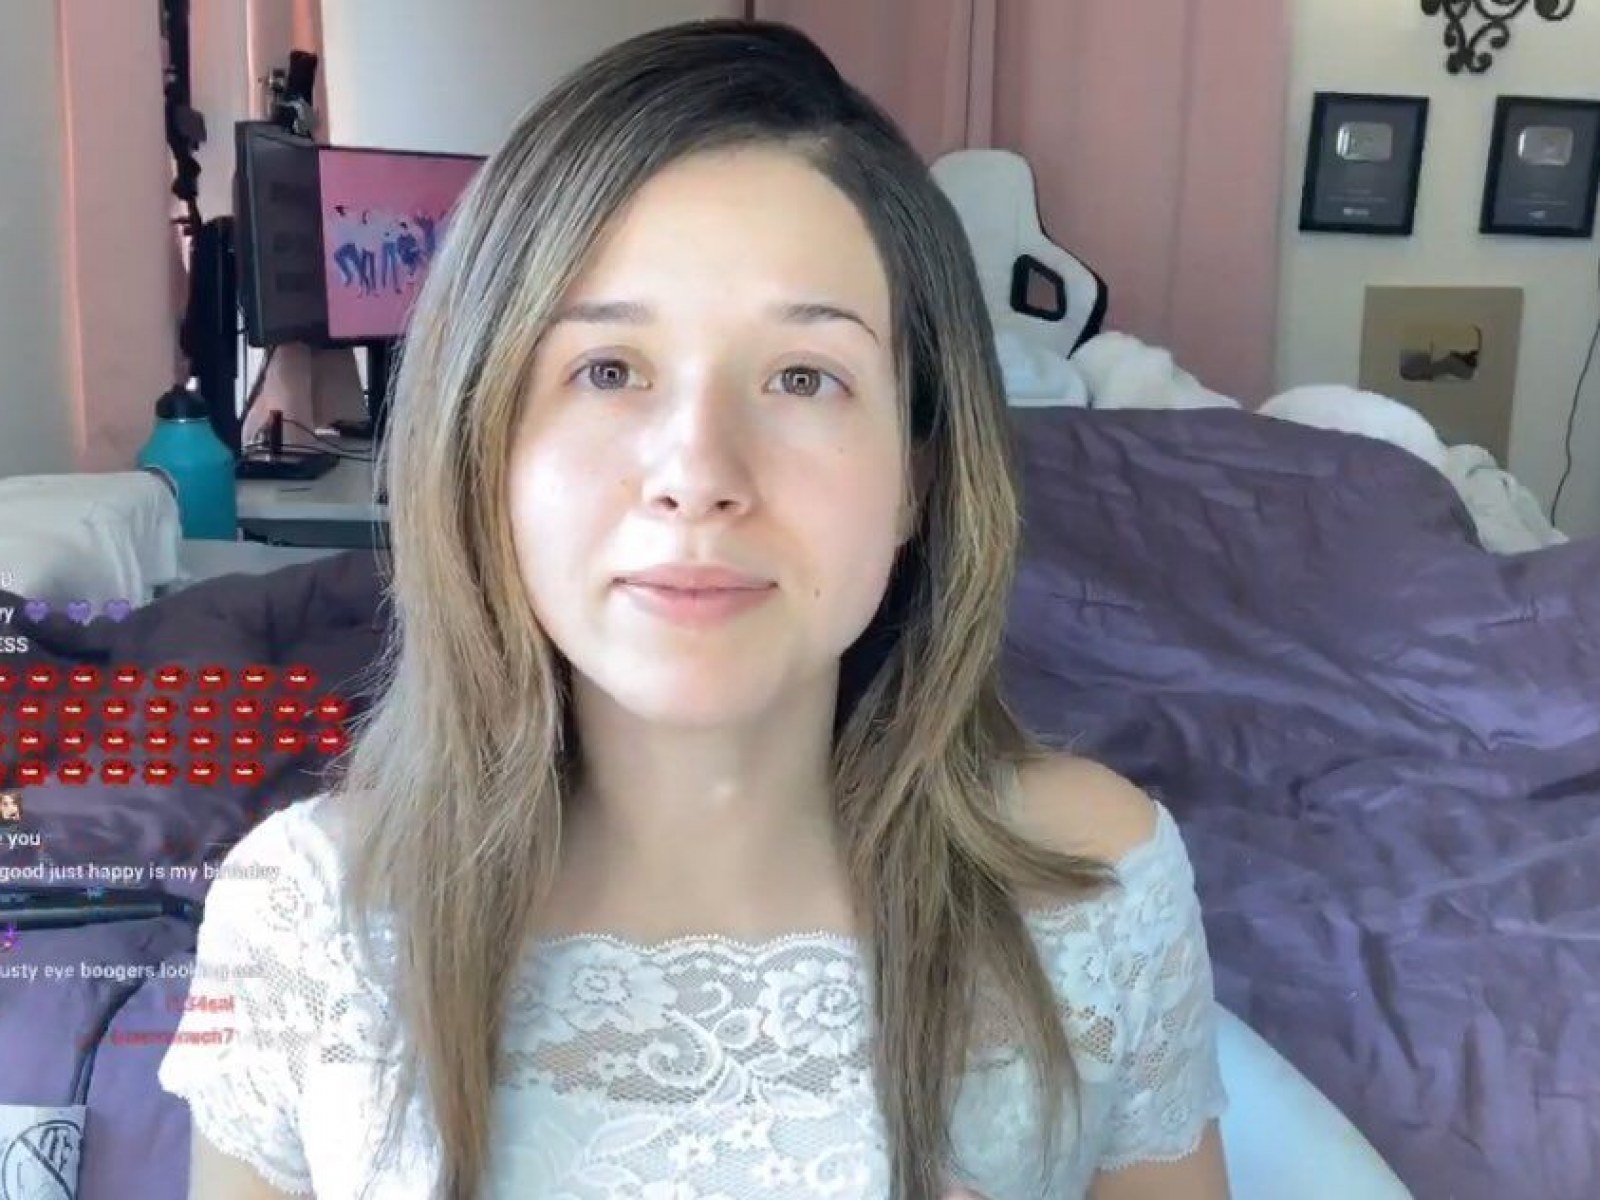 Pokimane with no make up made a ton of news recently